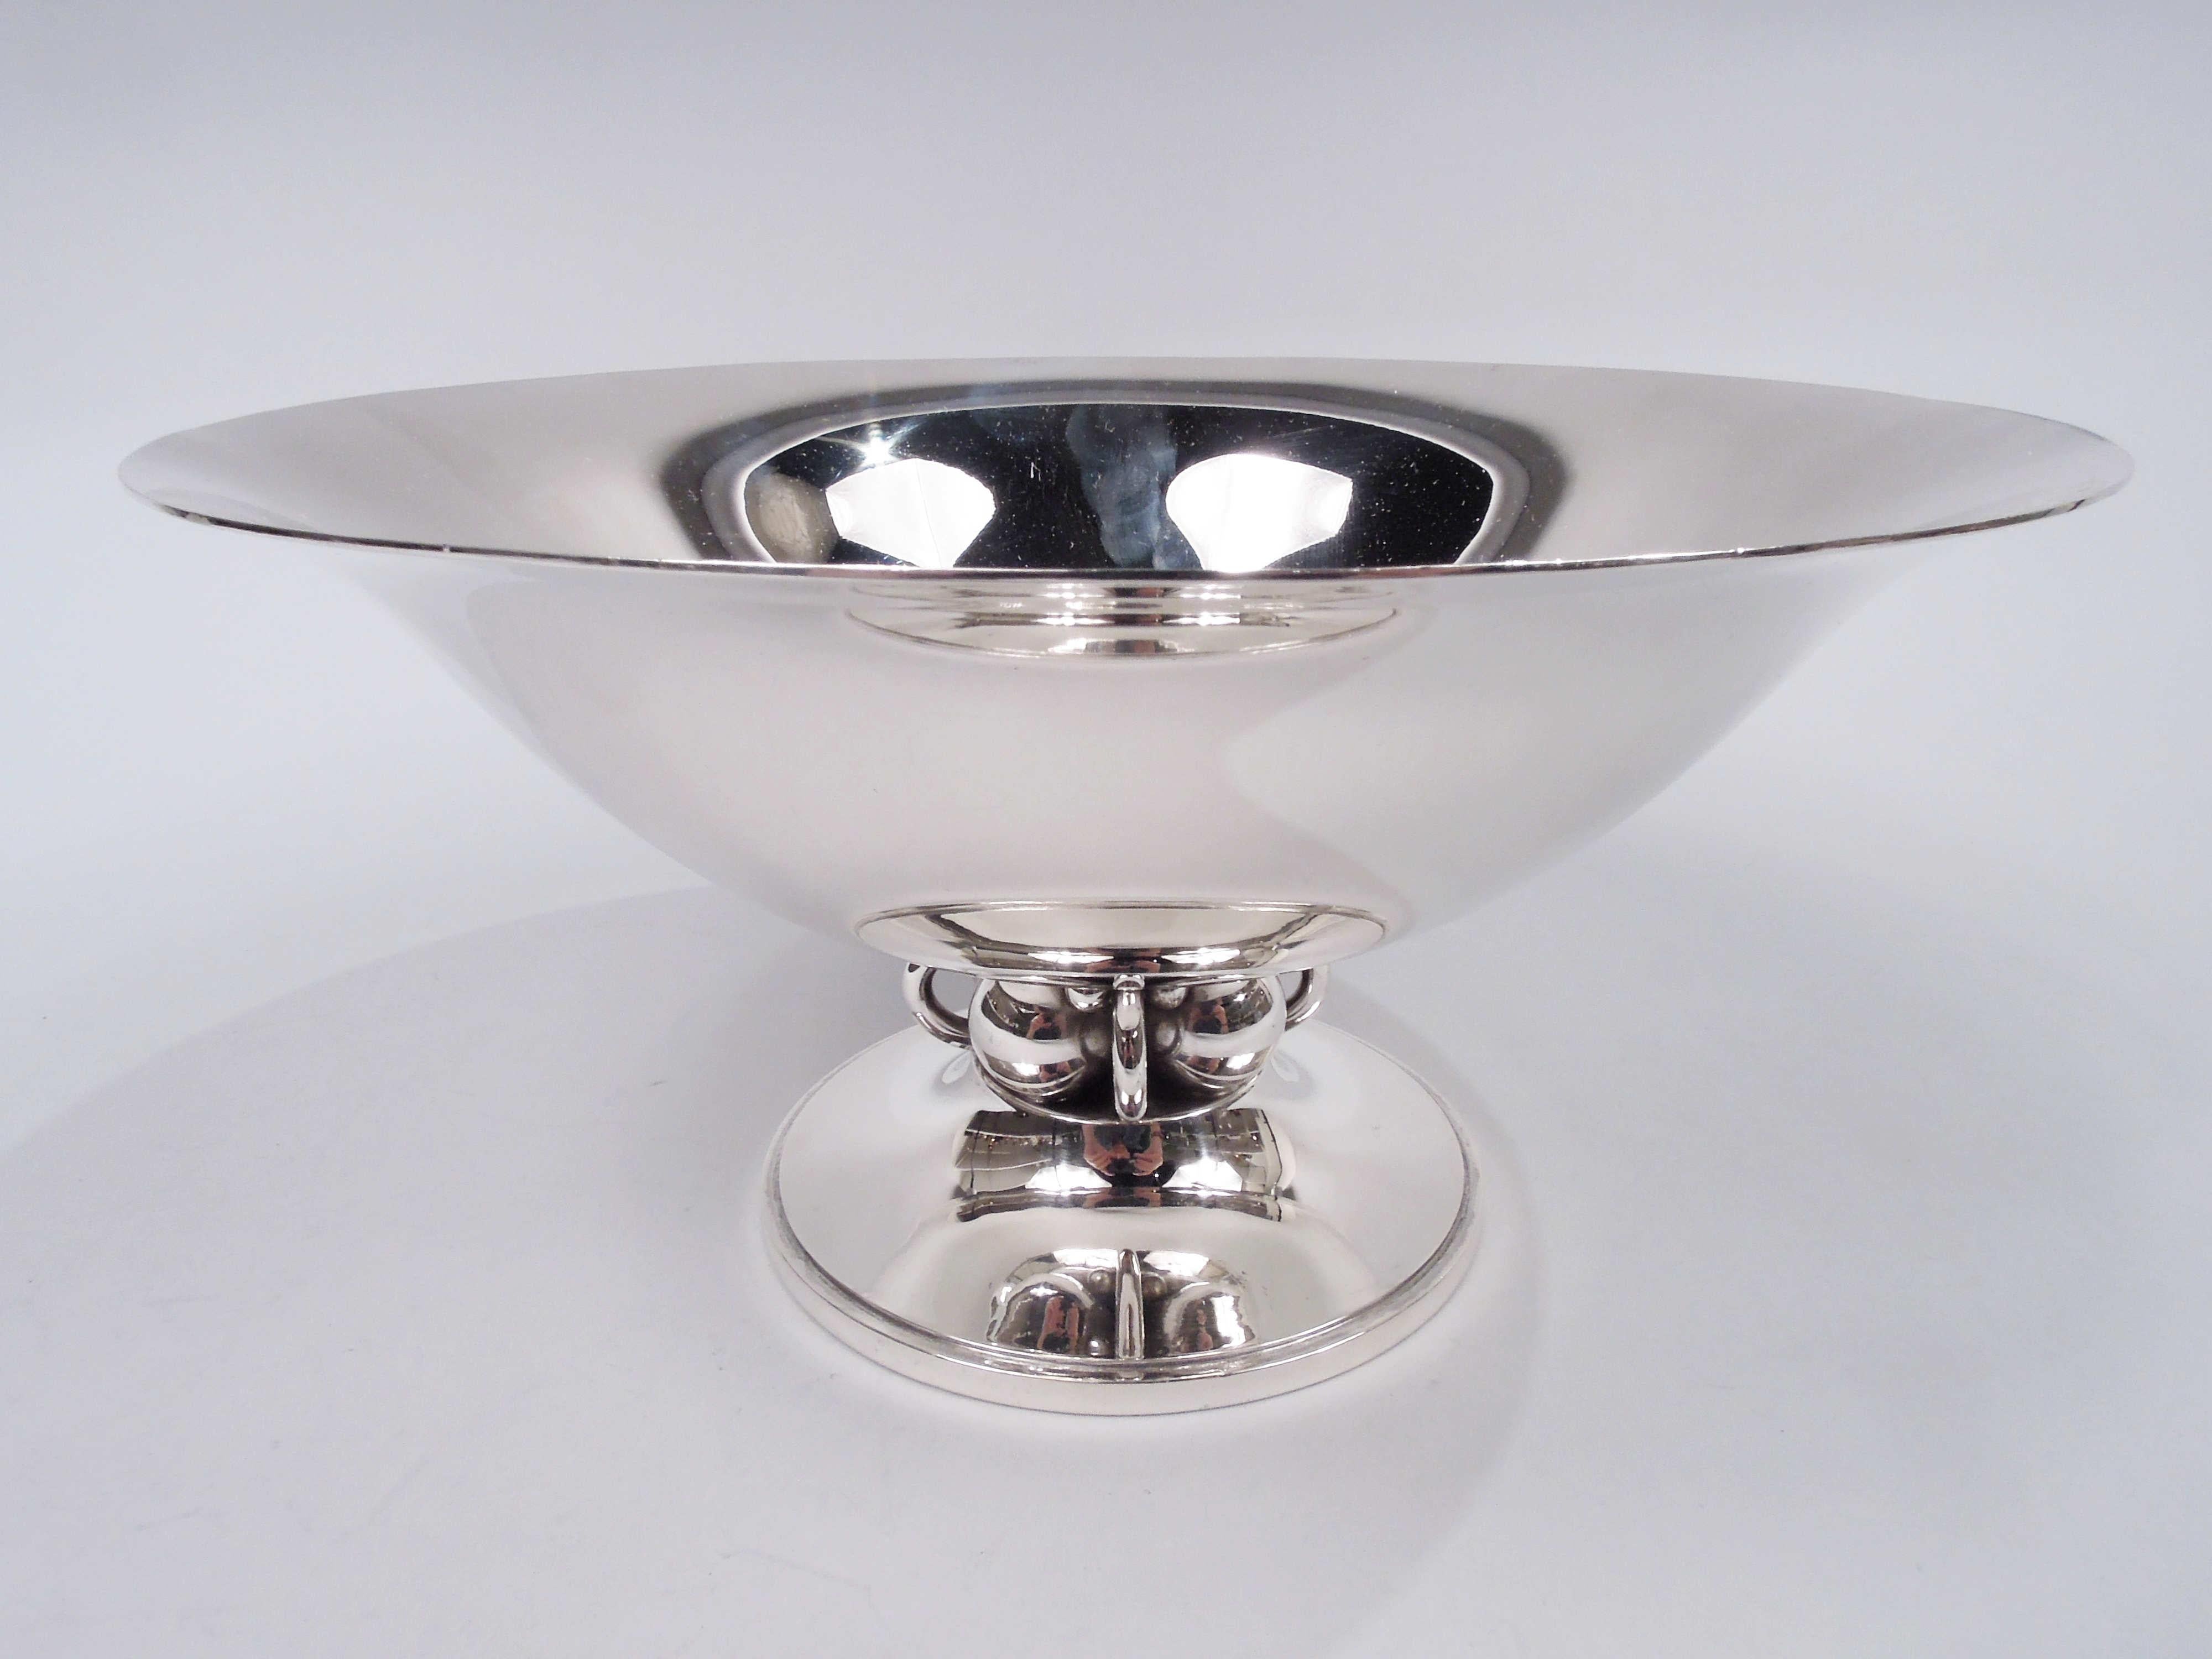 Midcentury Modern sterling silver centerpiece bowl. Made by Alphonse La Paglia (d. 1953) in New Jersey. Deep and tapering with flared rim. Raised foot with short support in the bead and ring arrangement that proved influential with other American